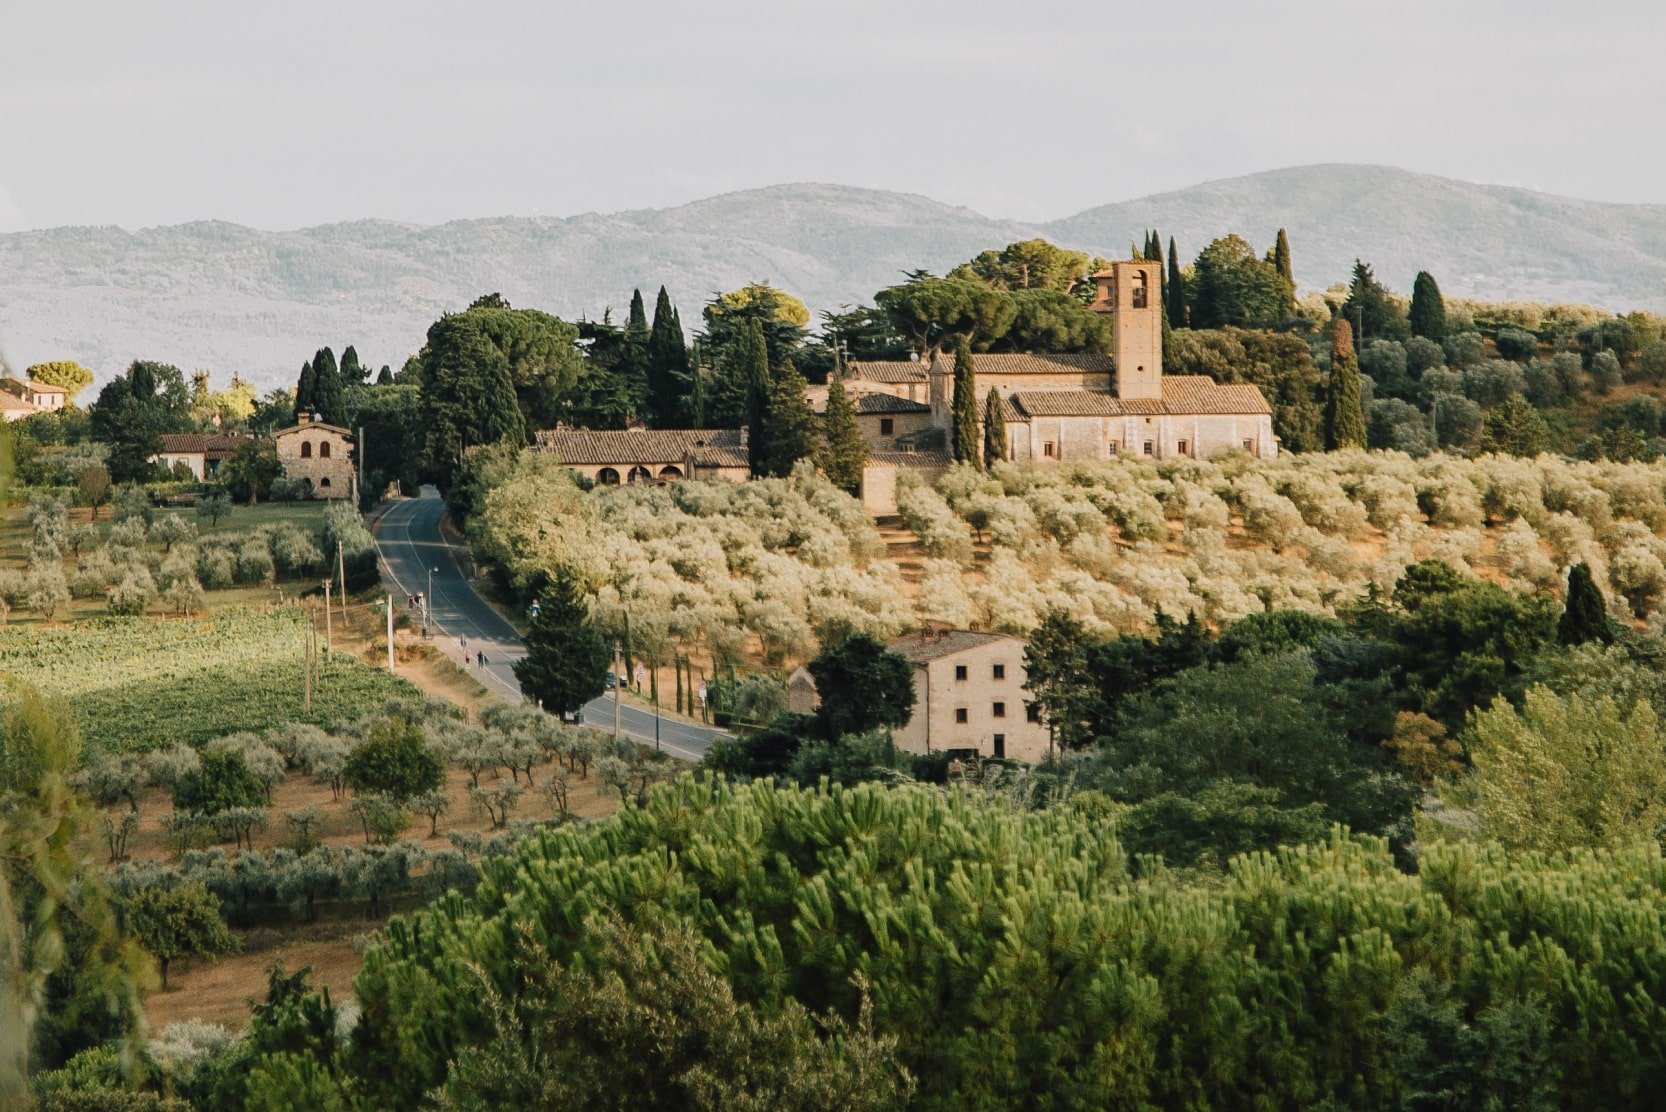 Luxury agritourism in Tuscany: top stays, activities, and areas